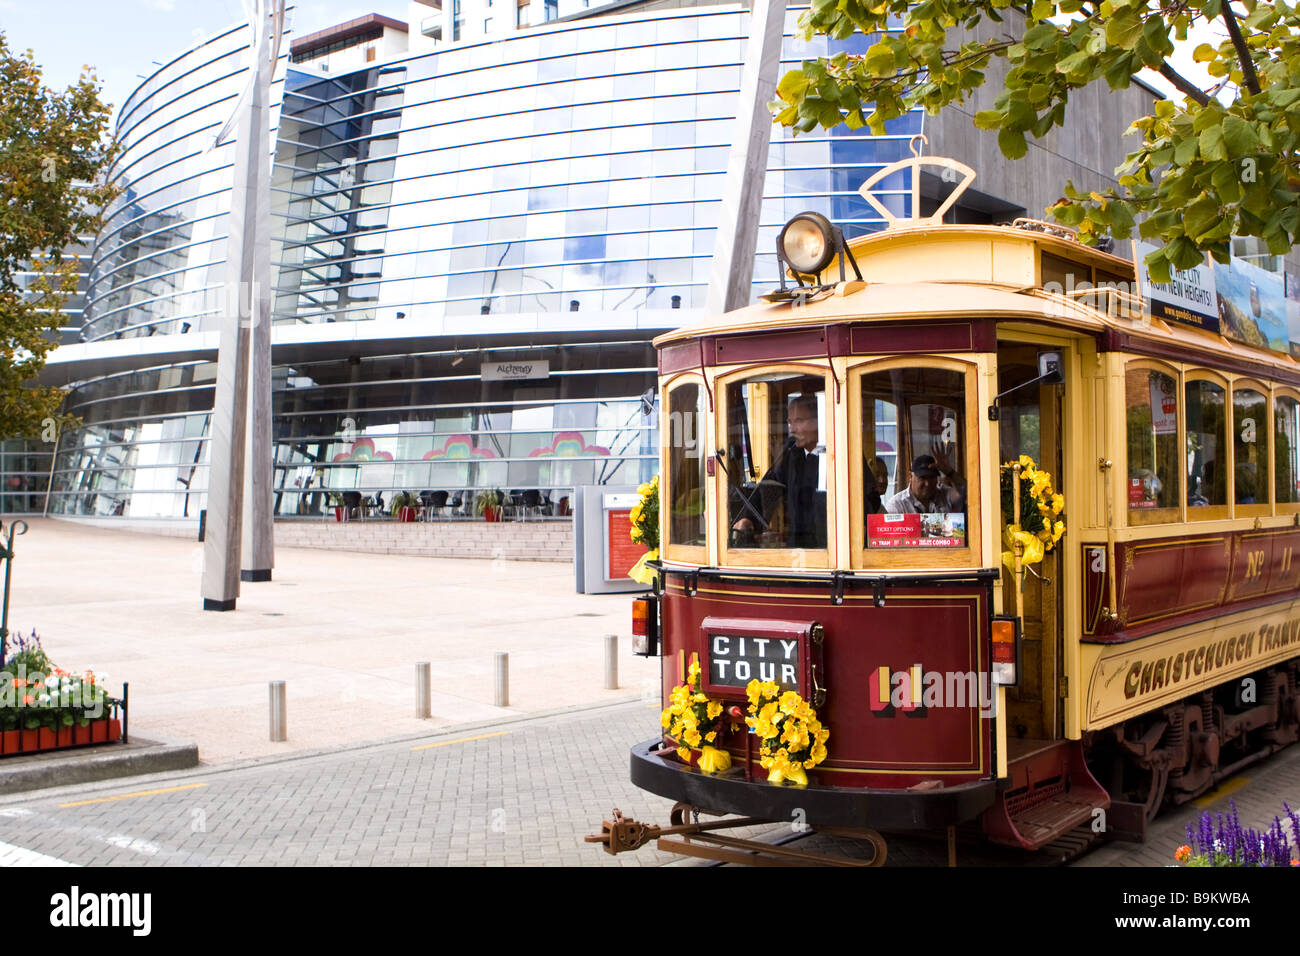 Tram outside Art Gallery in Christchurch New Zealand Stock Photo